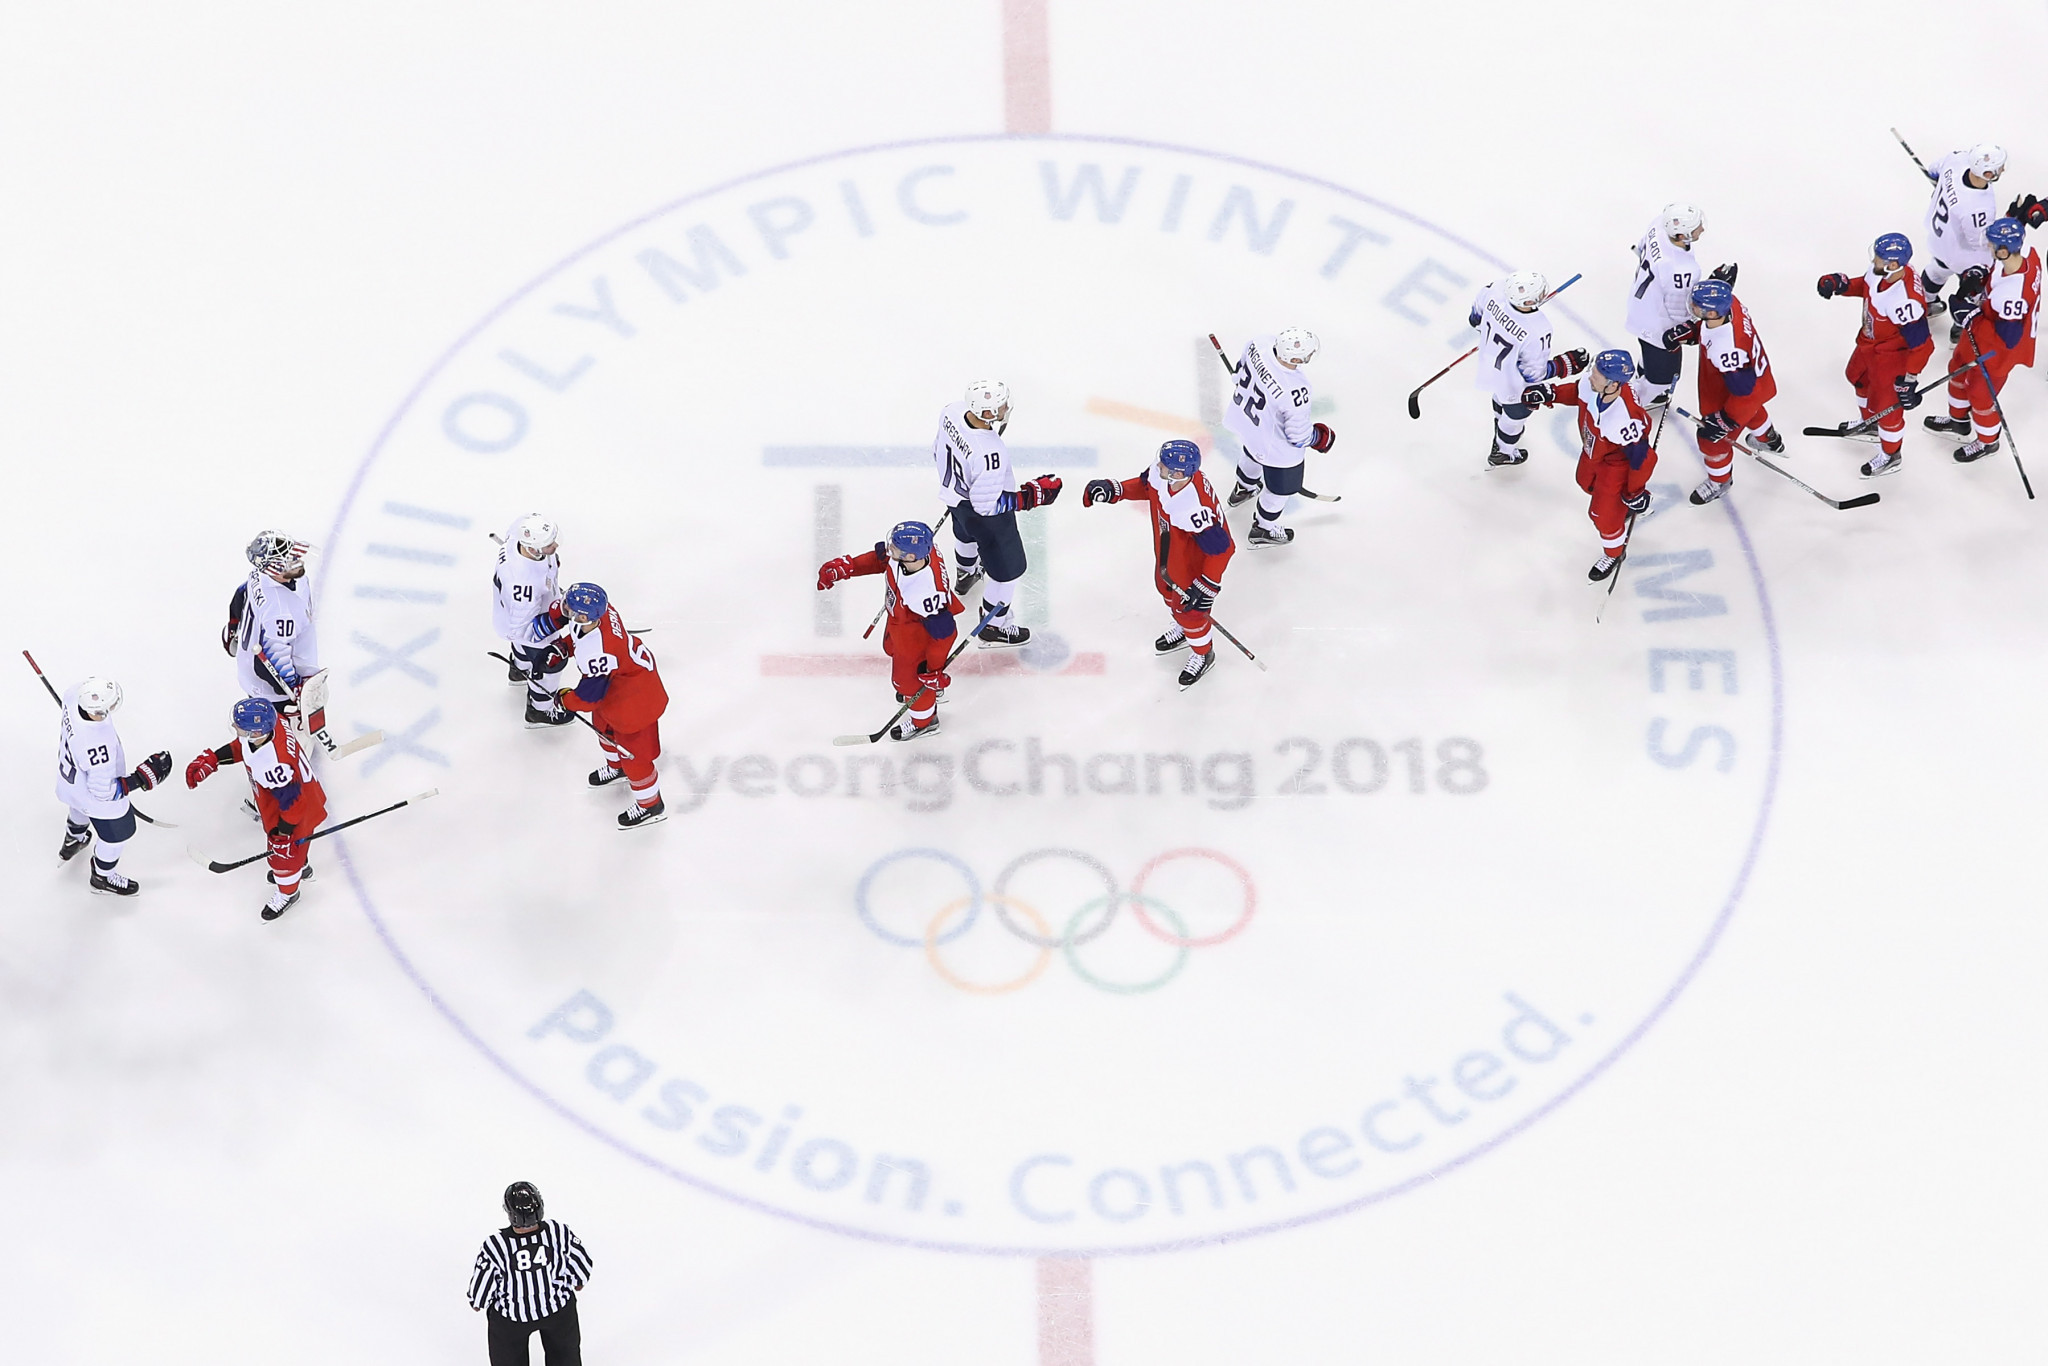 NHL players missed out at Pyeongchang 2018, and their Olympic involvement is once again believed to be in some doubt for next year's Games in Beijing ©Getty Images